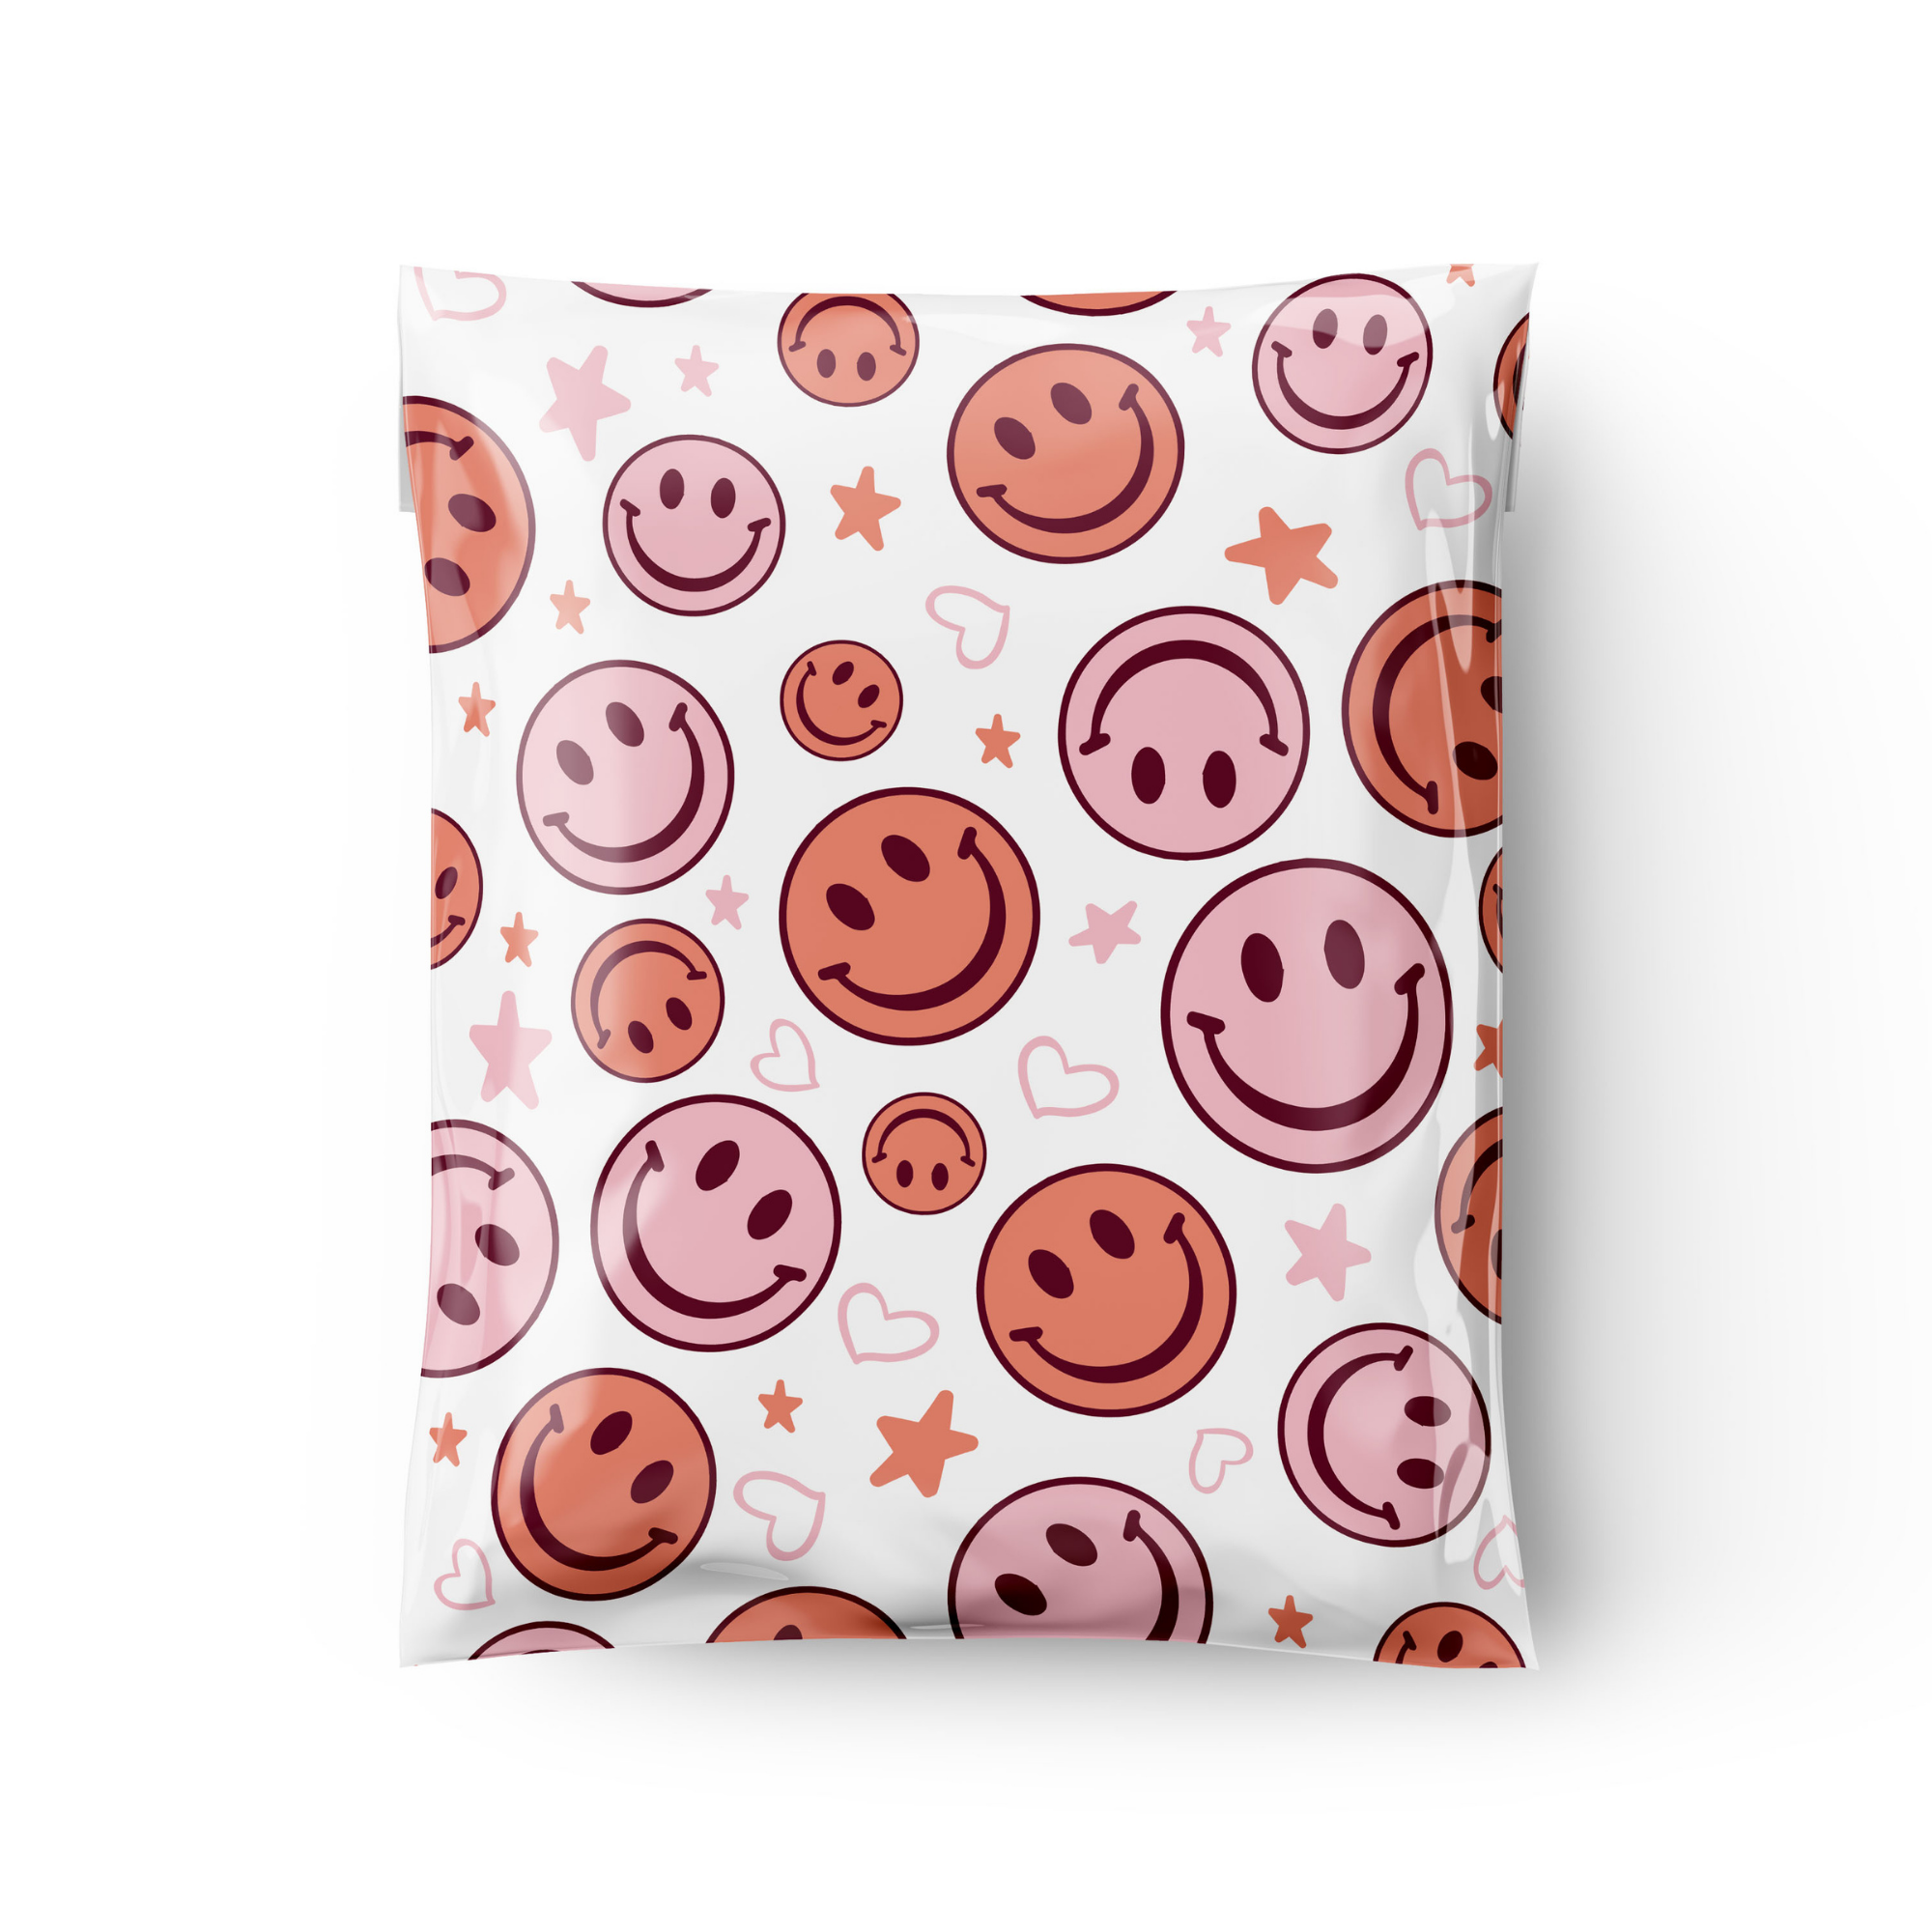 Smiley Face Poly Mailer, 10x13 Poly Bag for Shipping